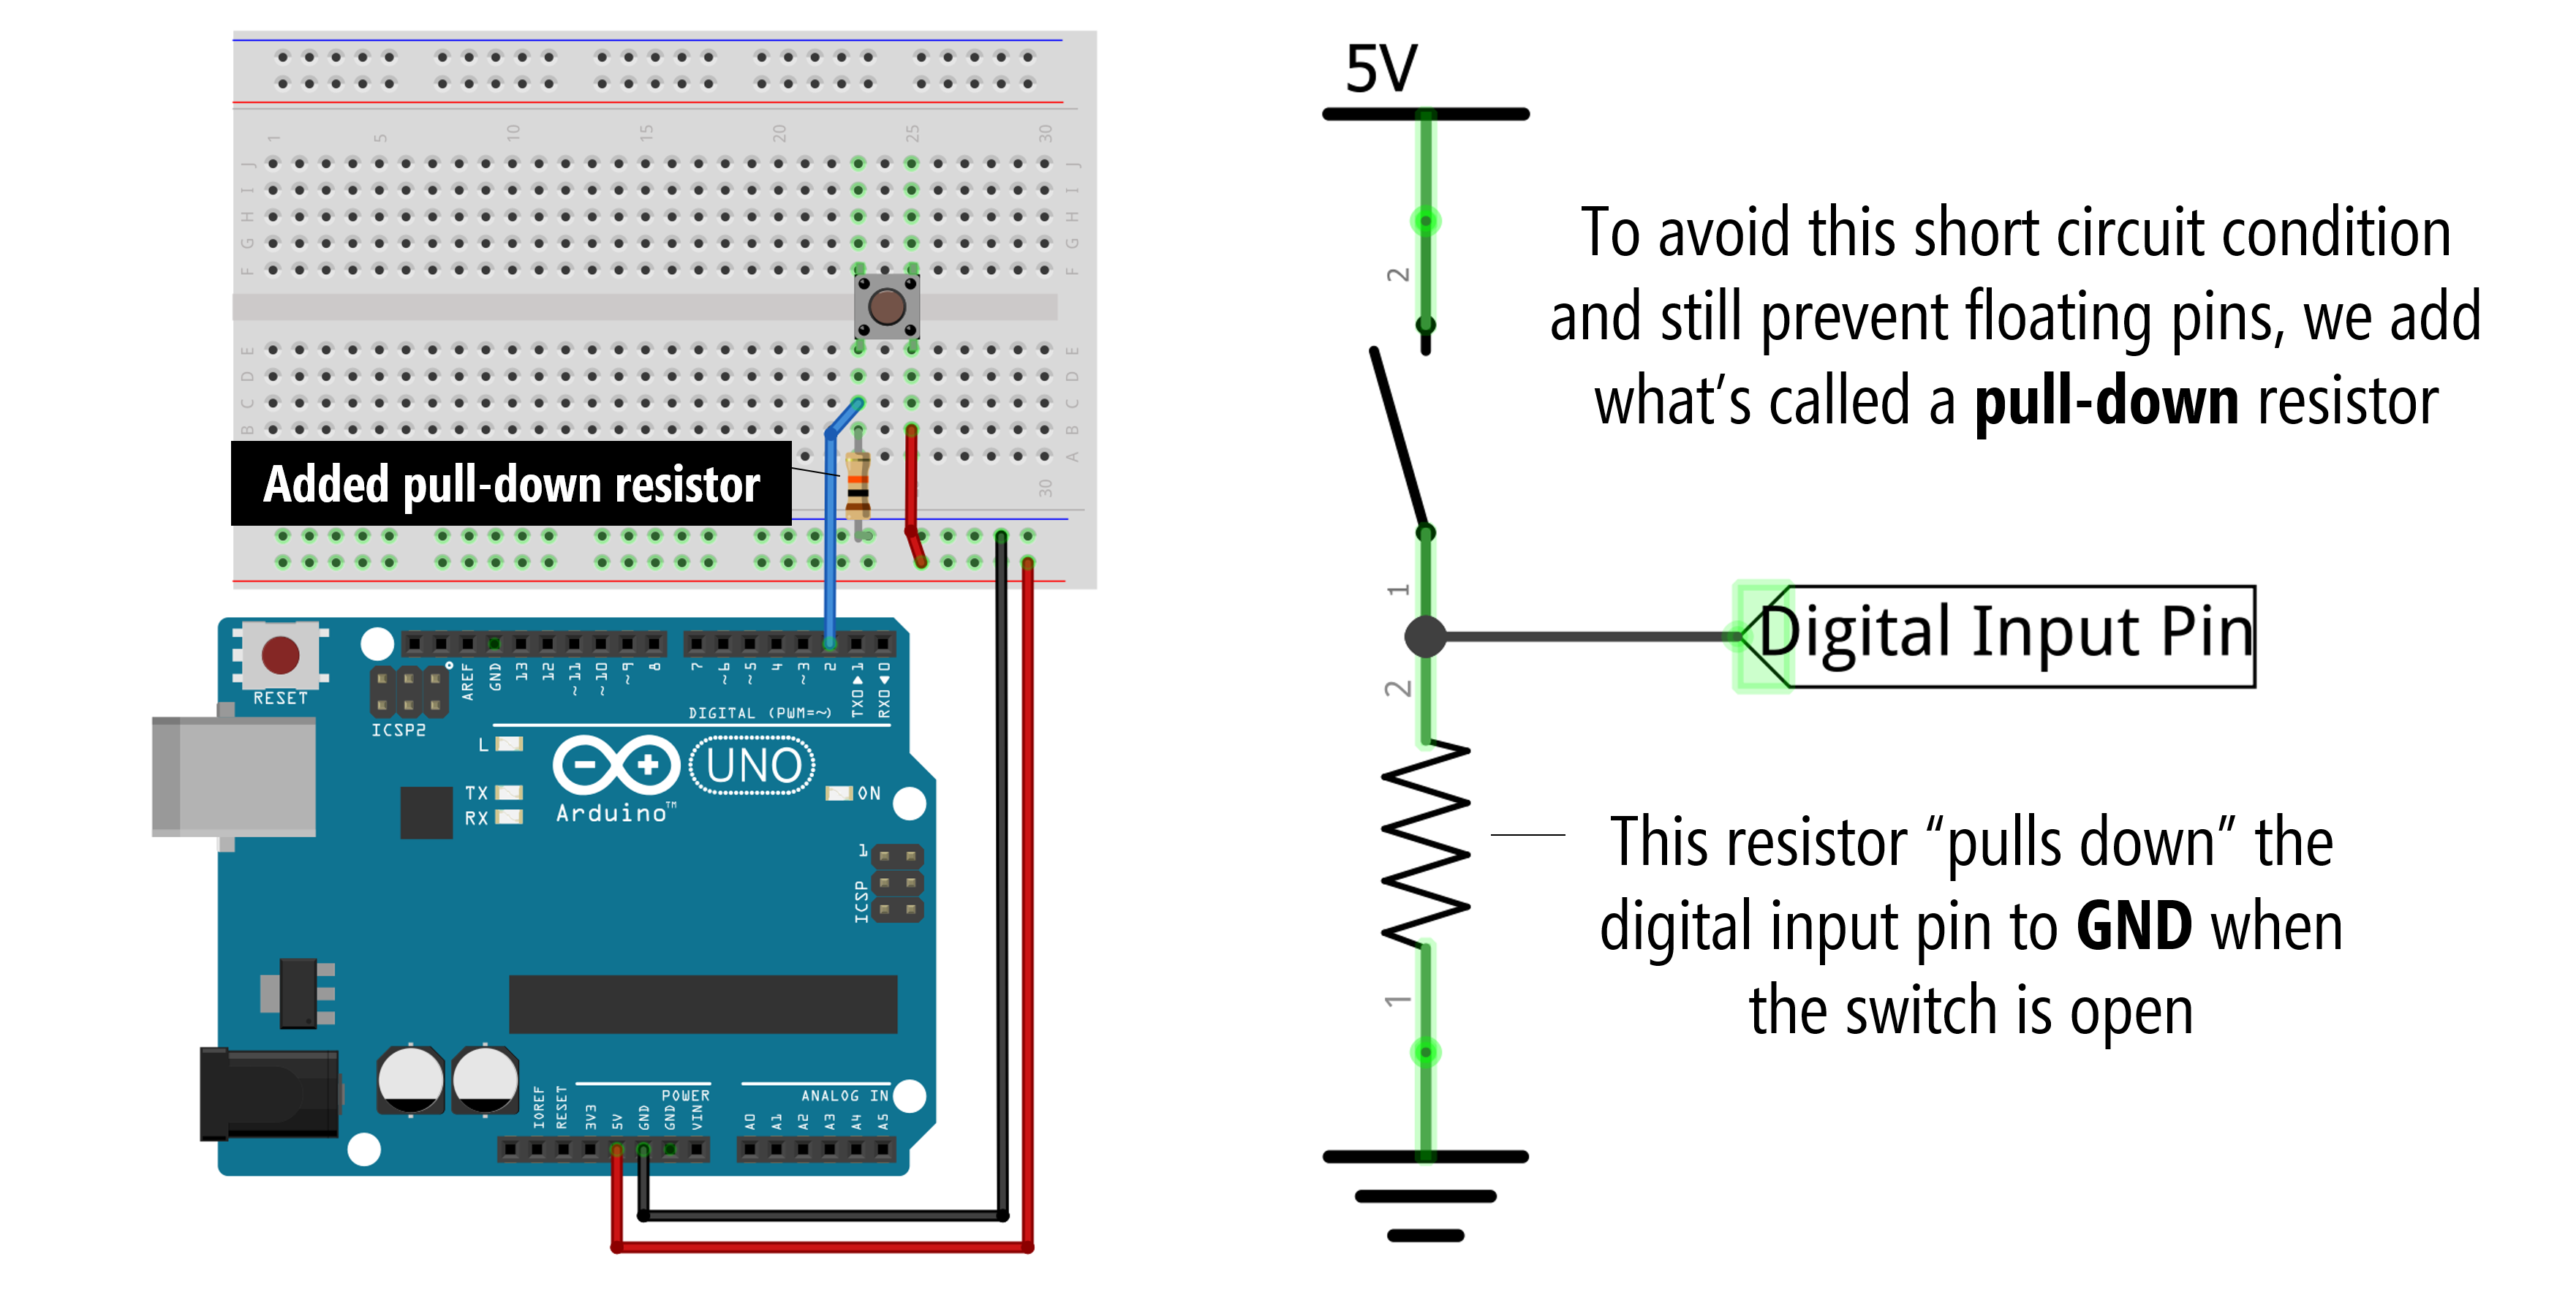 Circuit diagram showing a correct pull-down resistor circuit with the 5V connection then the digital input pin then a 10K resistor then GND